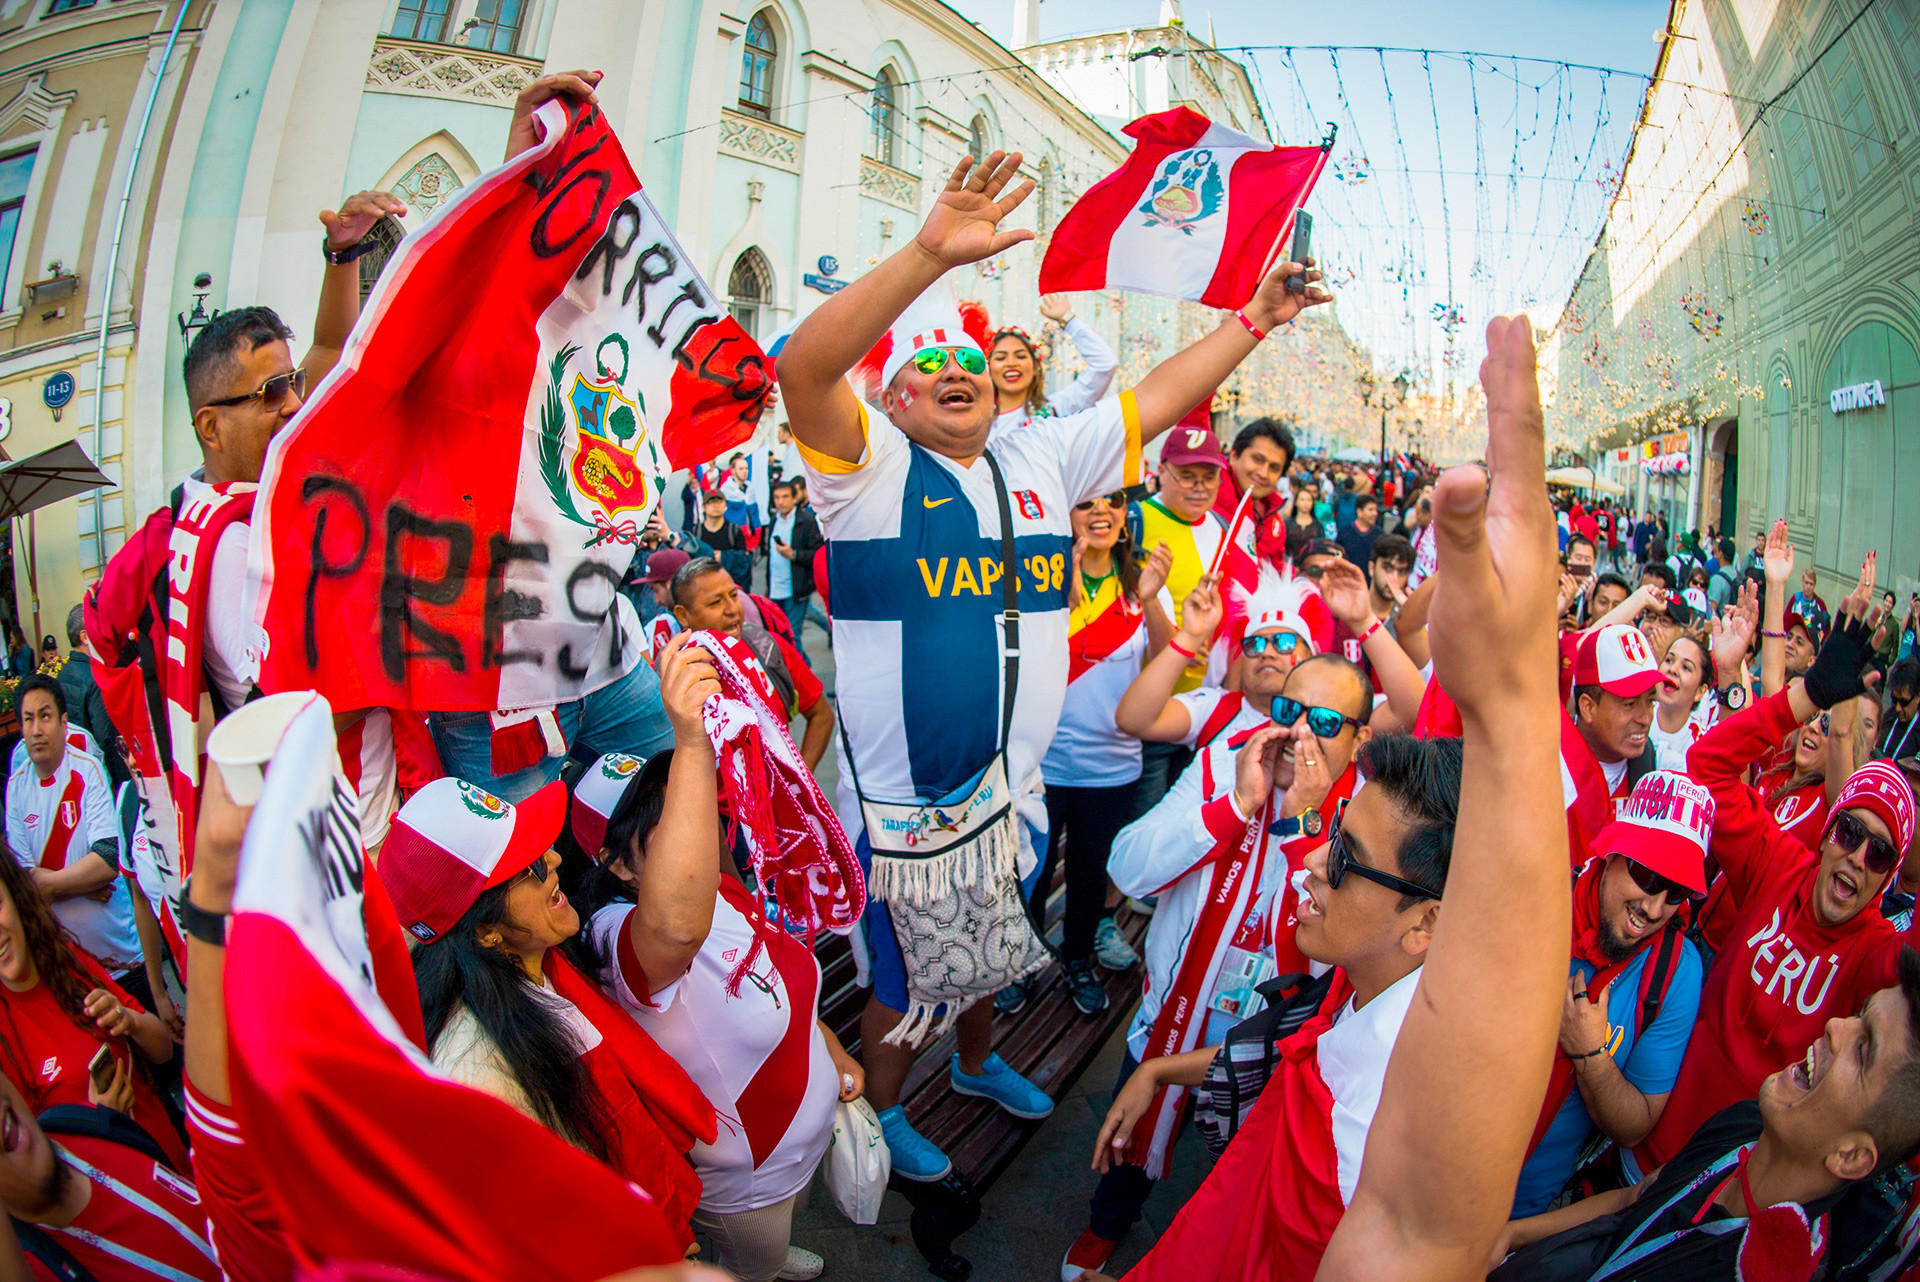 The Peruvians are in fine voice ahead of their first World Cup Finals since 1982. They’ll be looking to shrug off the threat of France, Denmark, and Australia.